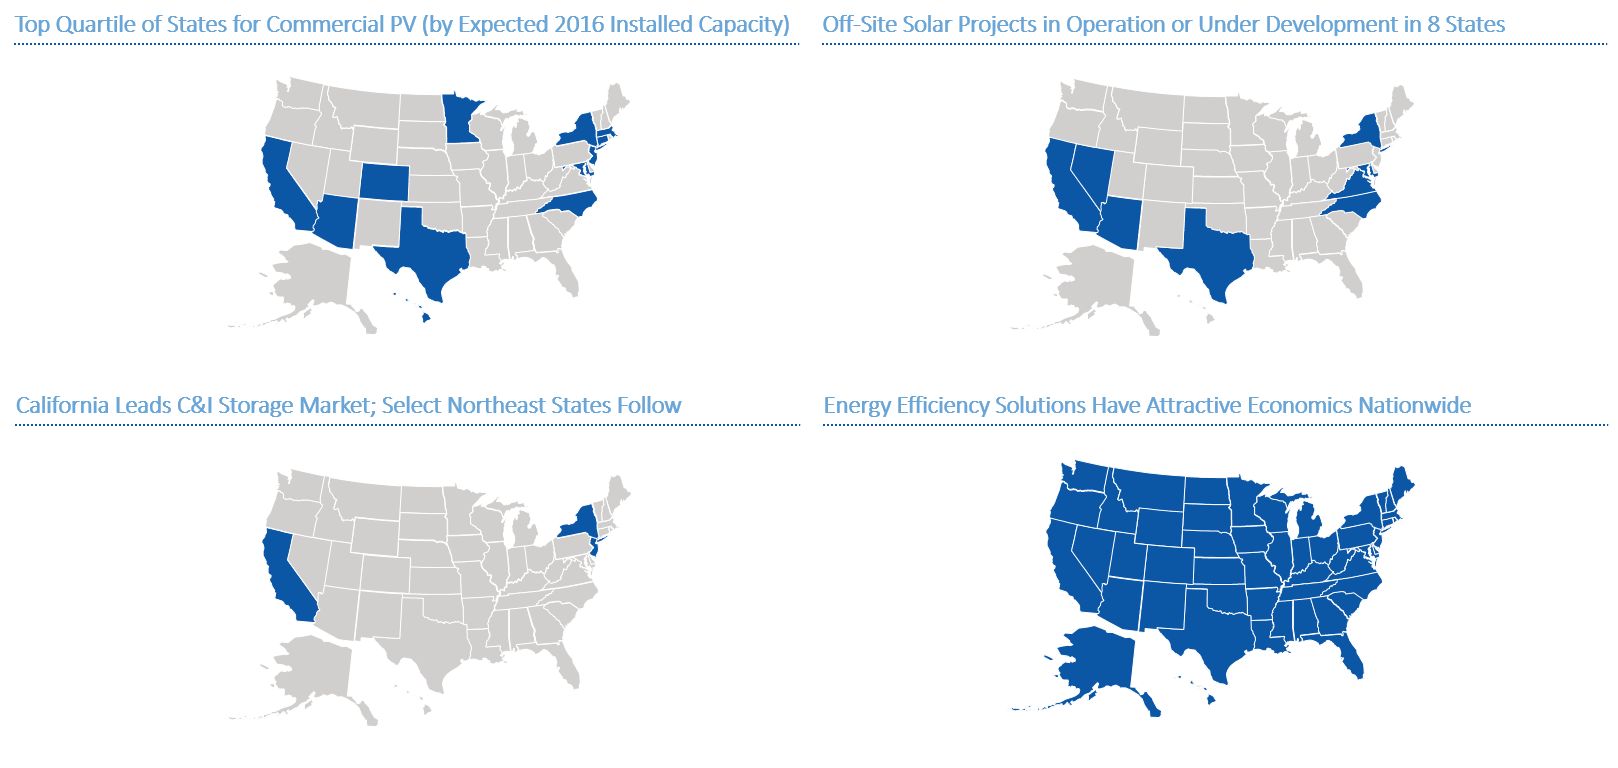 viability of individual energy management solutions varies state by state